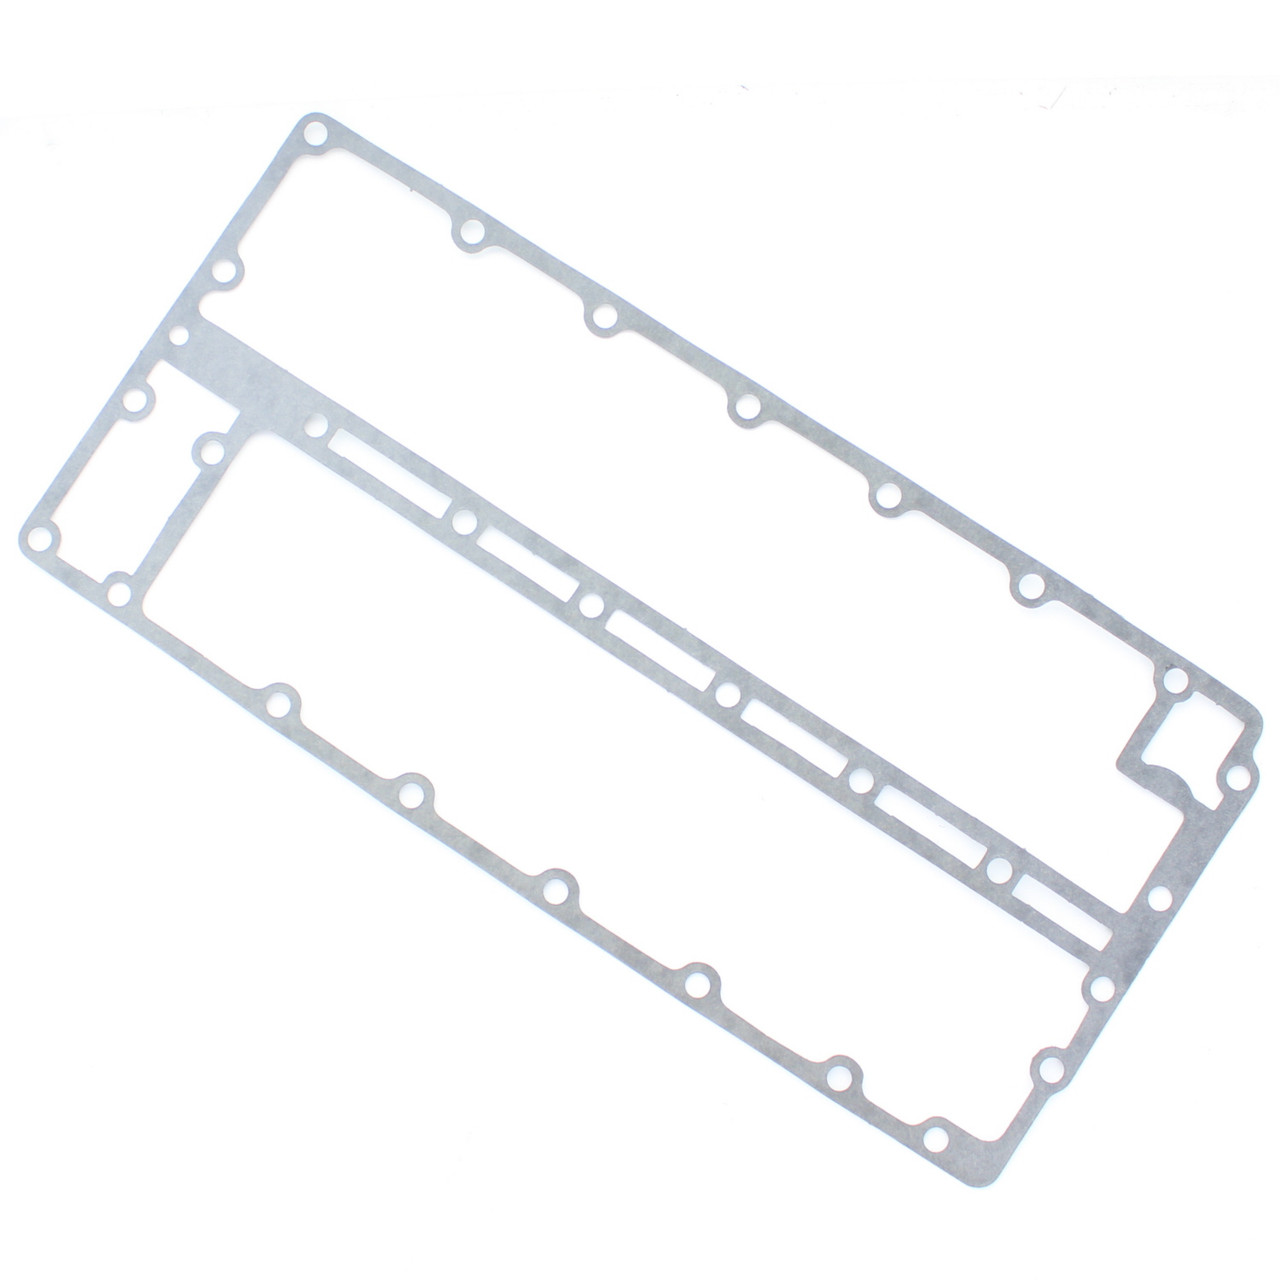 Johnson Evinrude OMC New OEM Outboard Inner Cover Gasket, 321182, 0321182